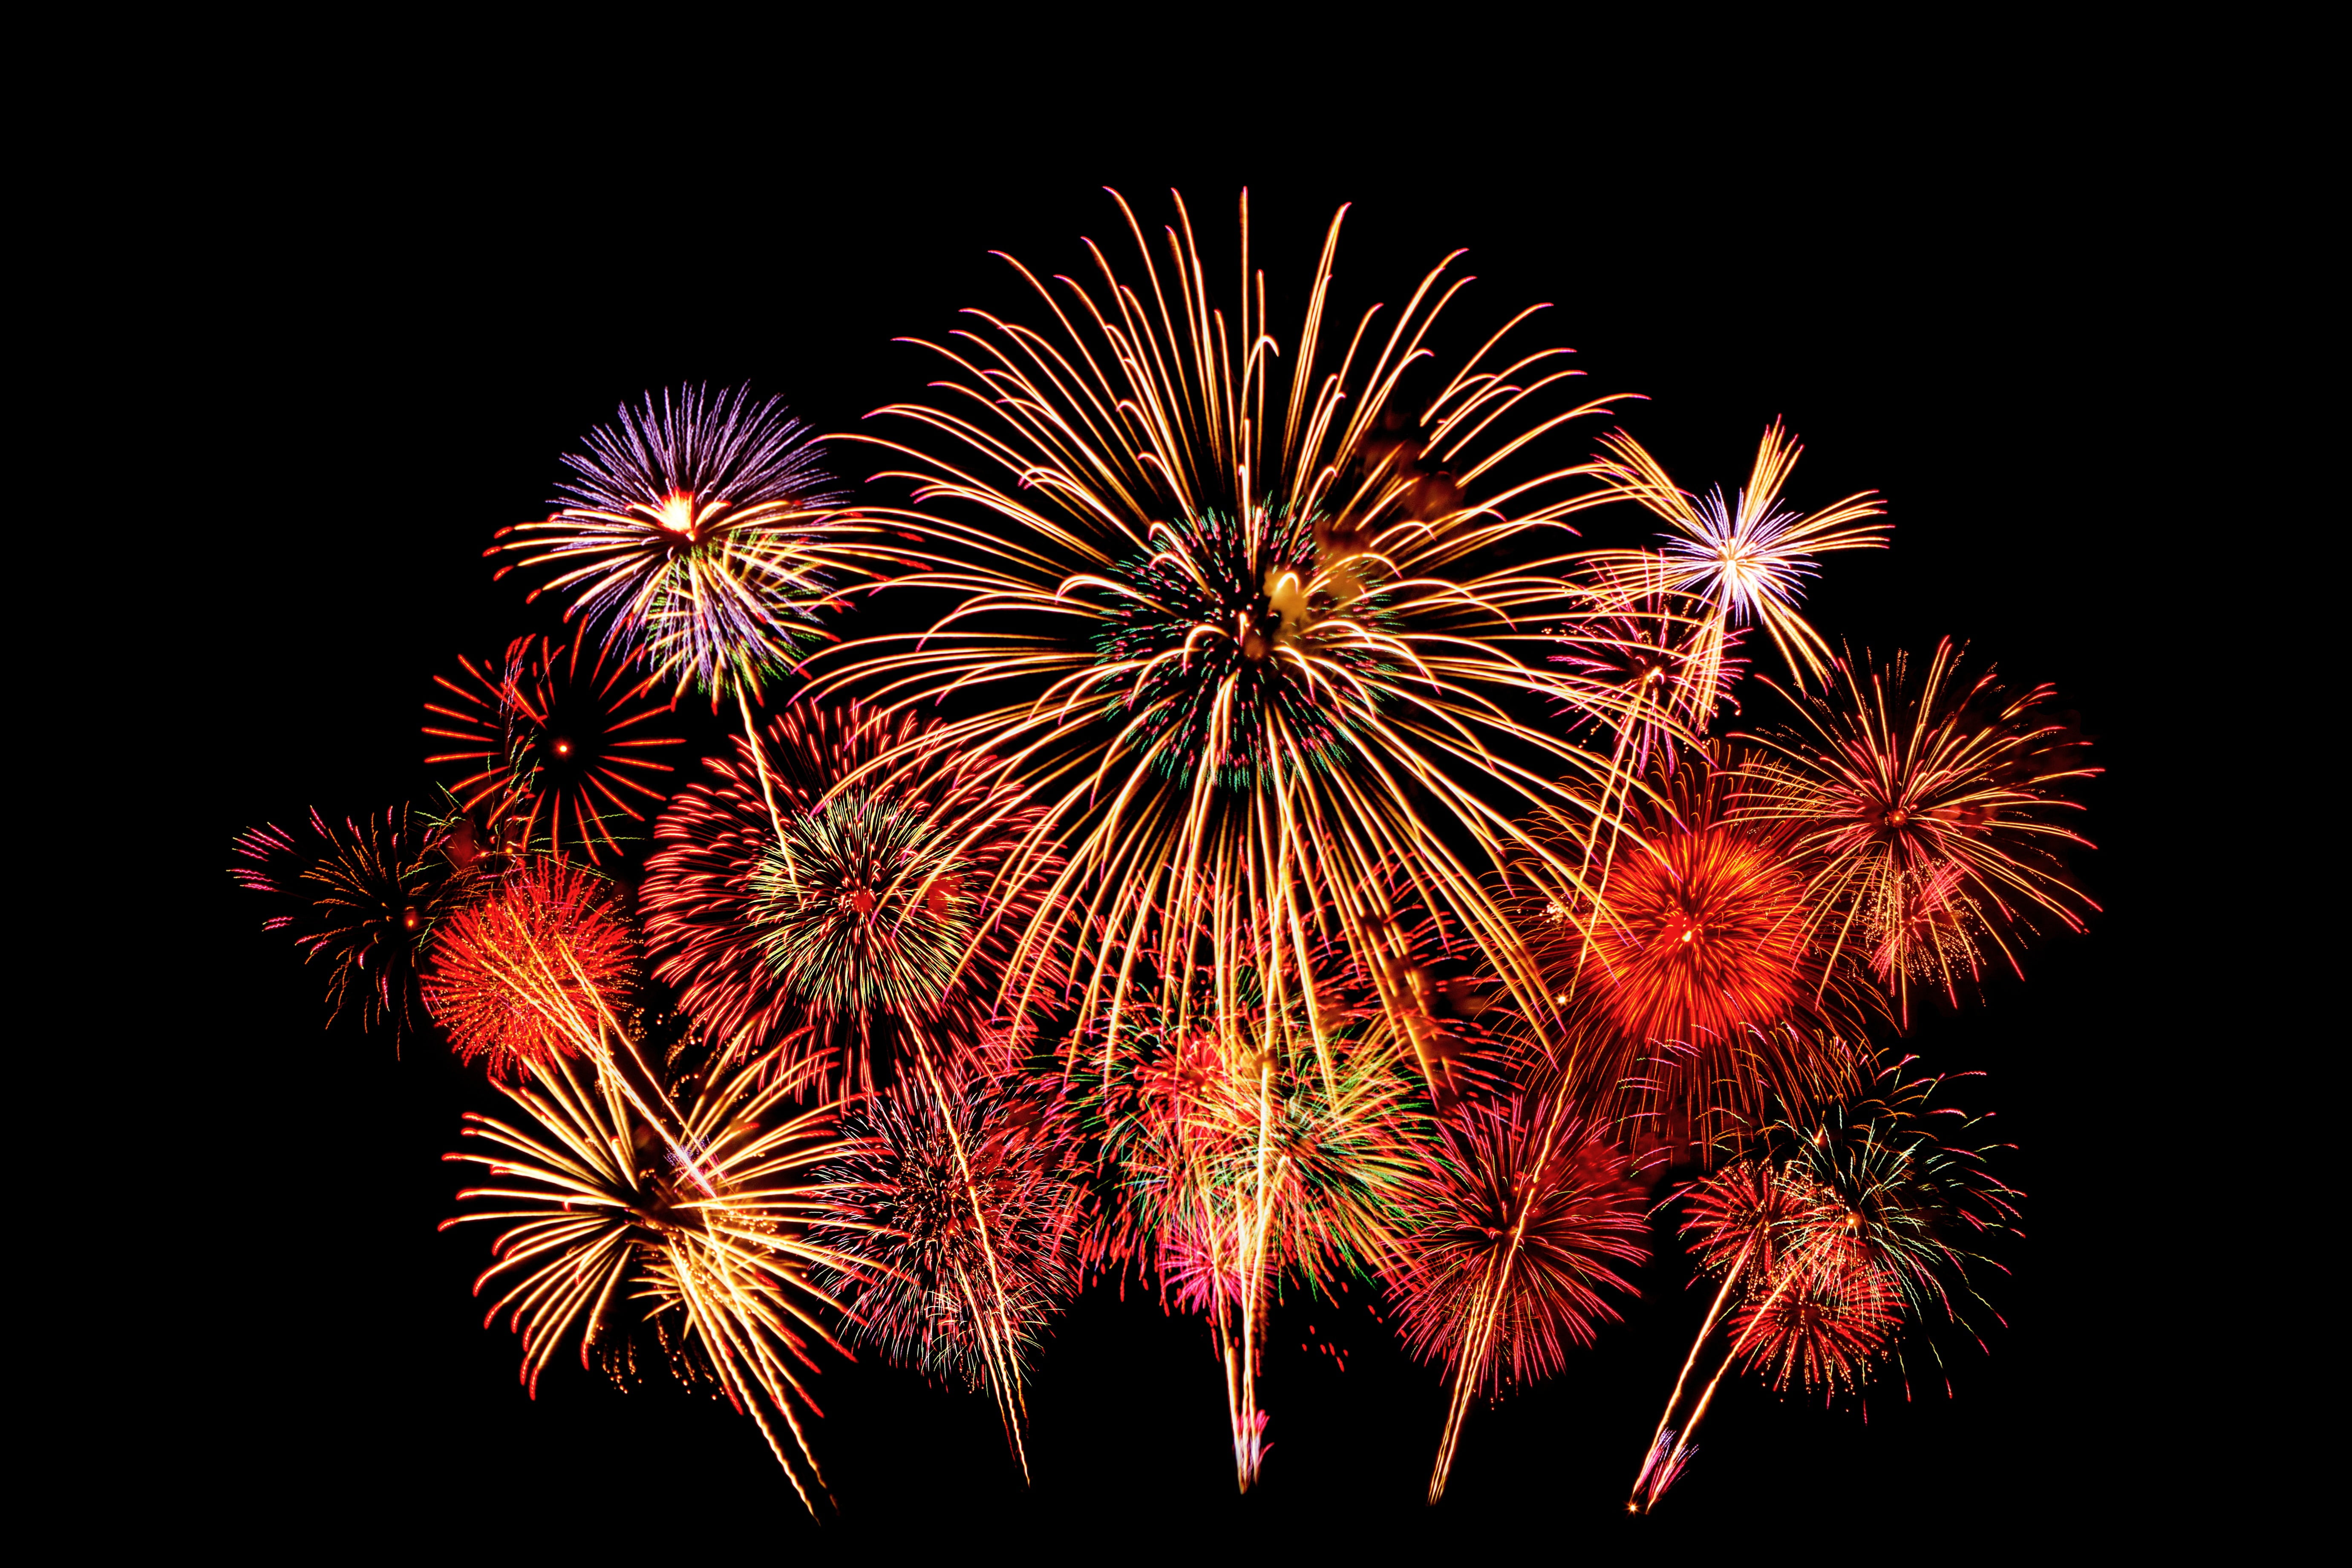 red and brown fireworks display